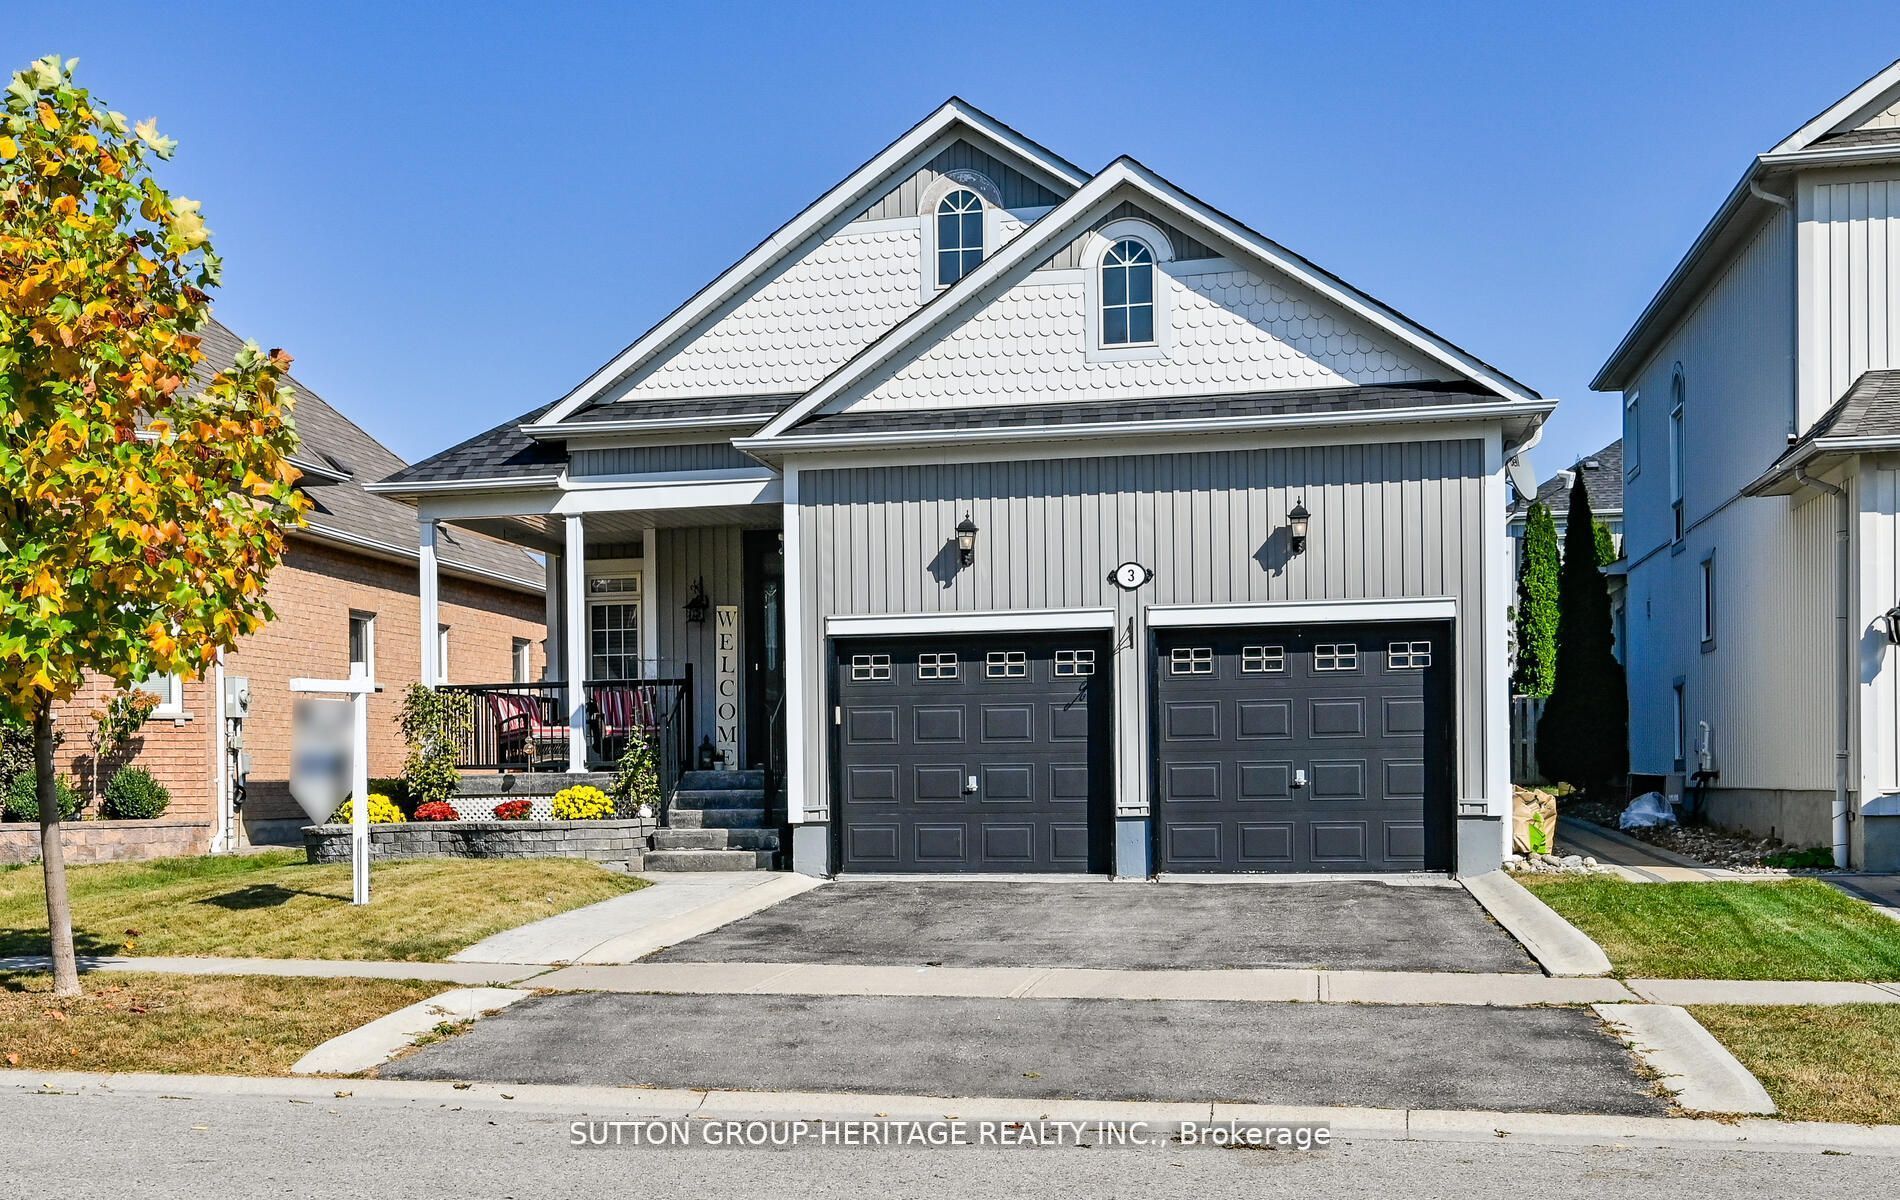 I have sold a property at 3 Penhurst DR in Whitby
